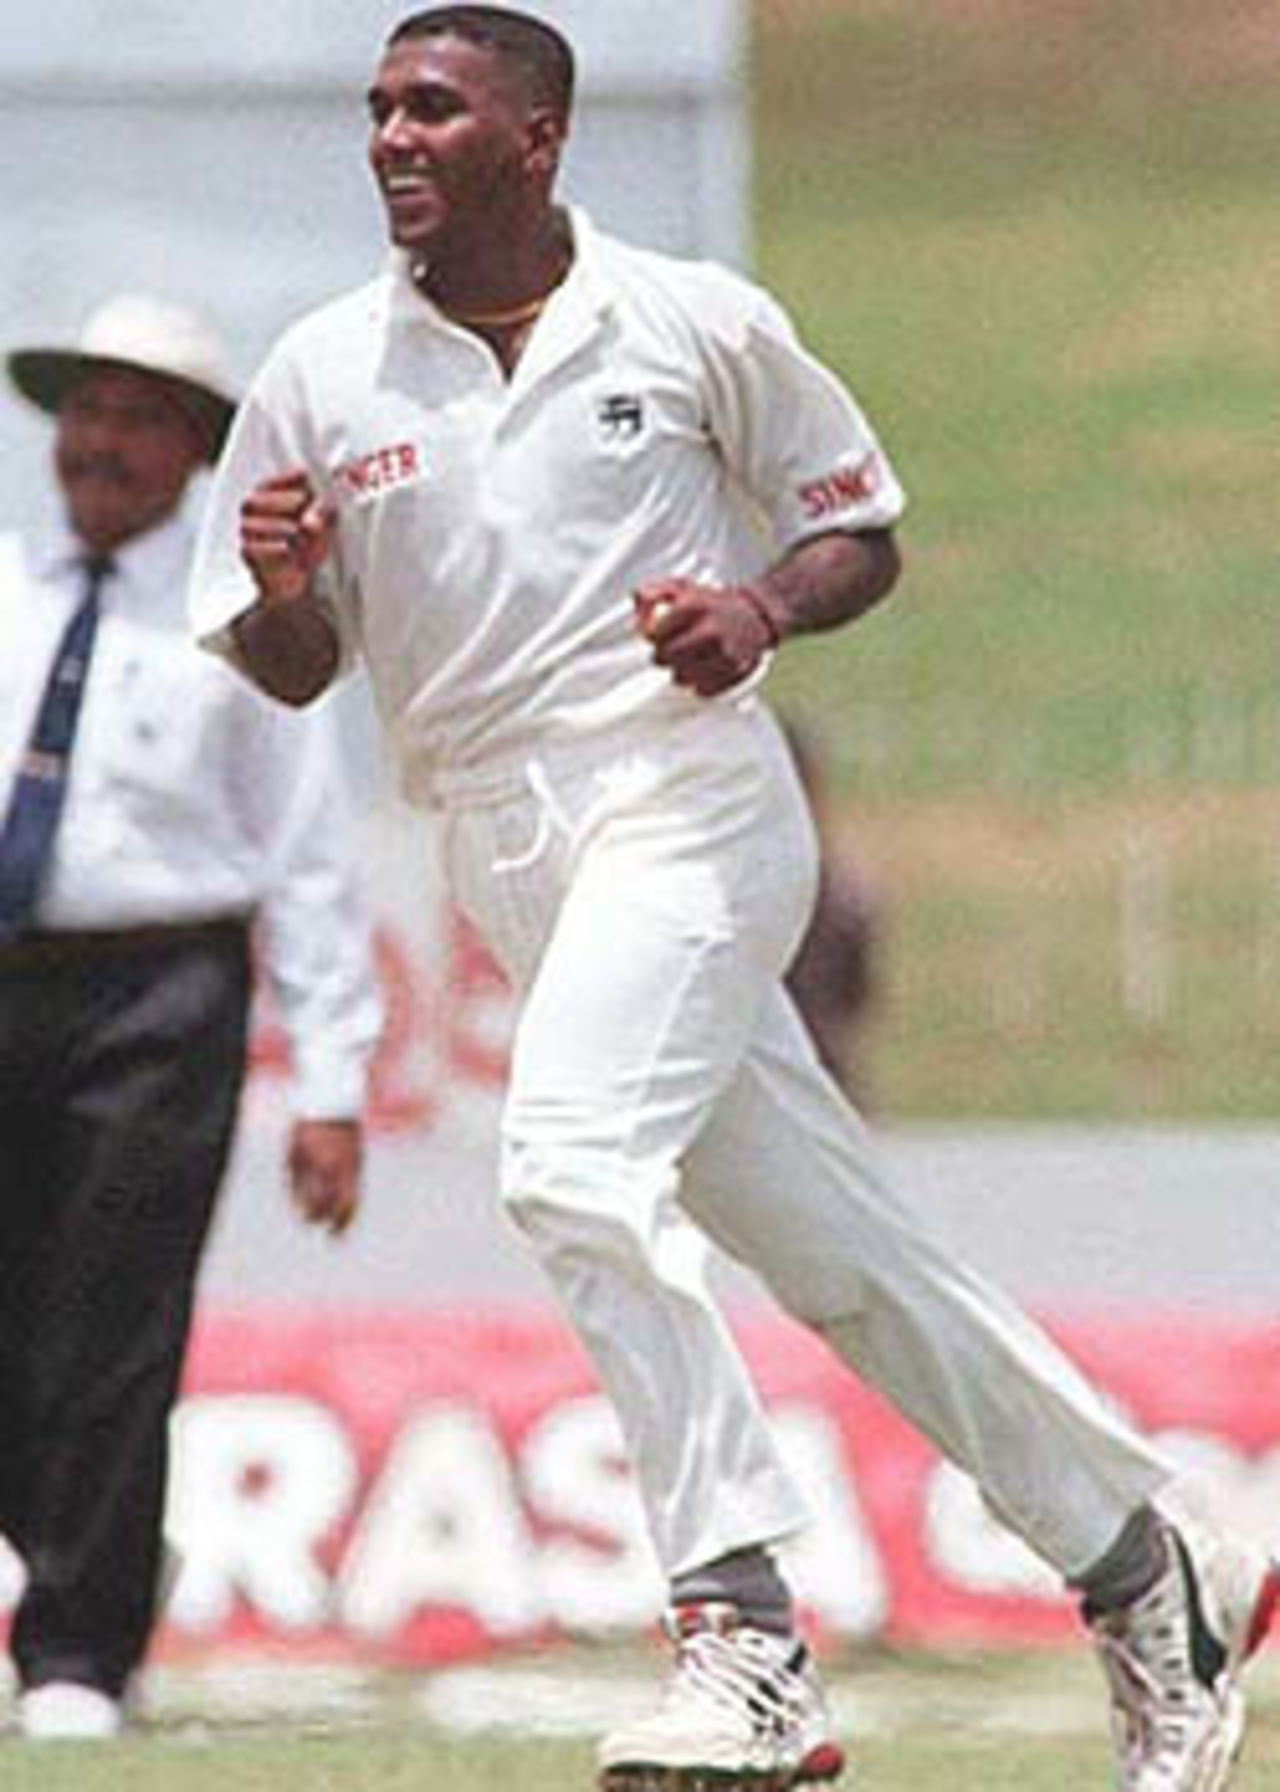 Sri Lankan bowler Ruchira Perera in action, South Africa in Sri Lanka, 2000/01, 3rd Test, Sri Lanka v South Africa, Sinhalese Sports Club Ground, Colombo, 06-10 August 2000 (Day 1).